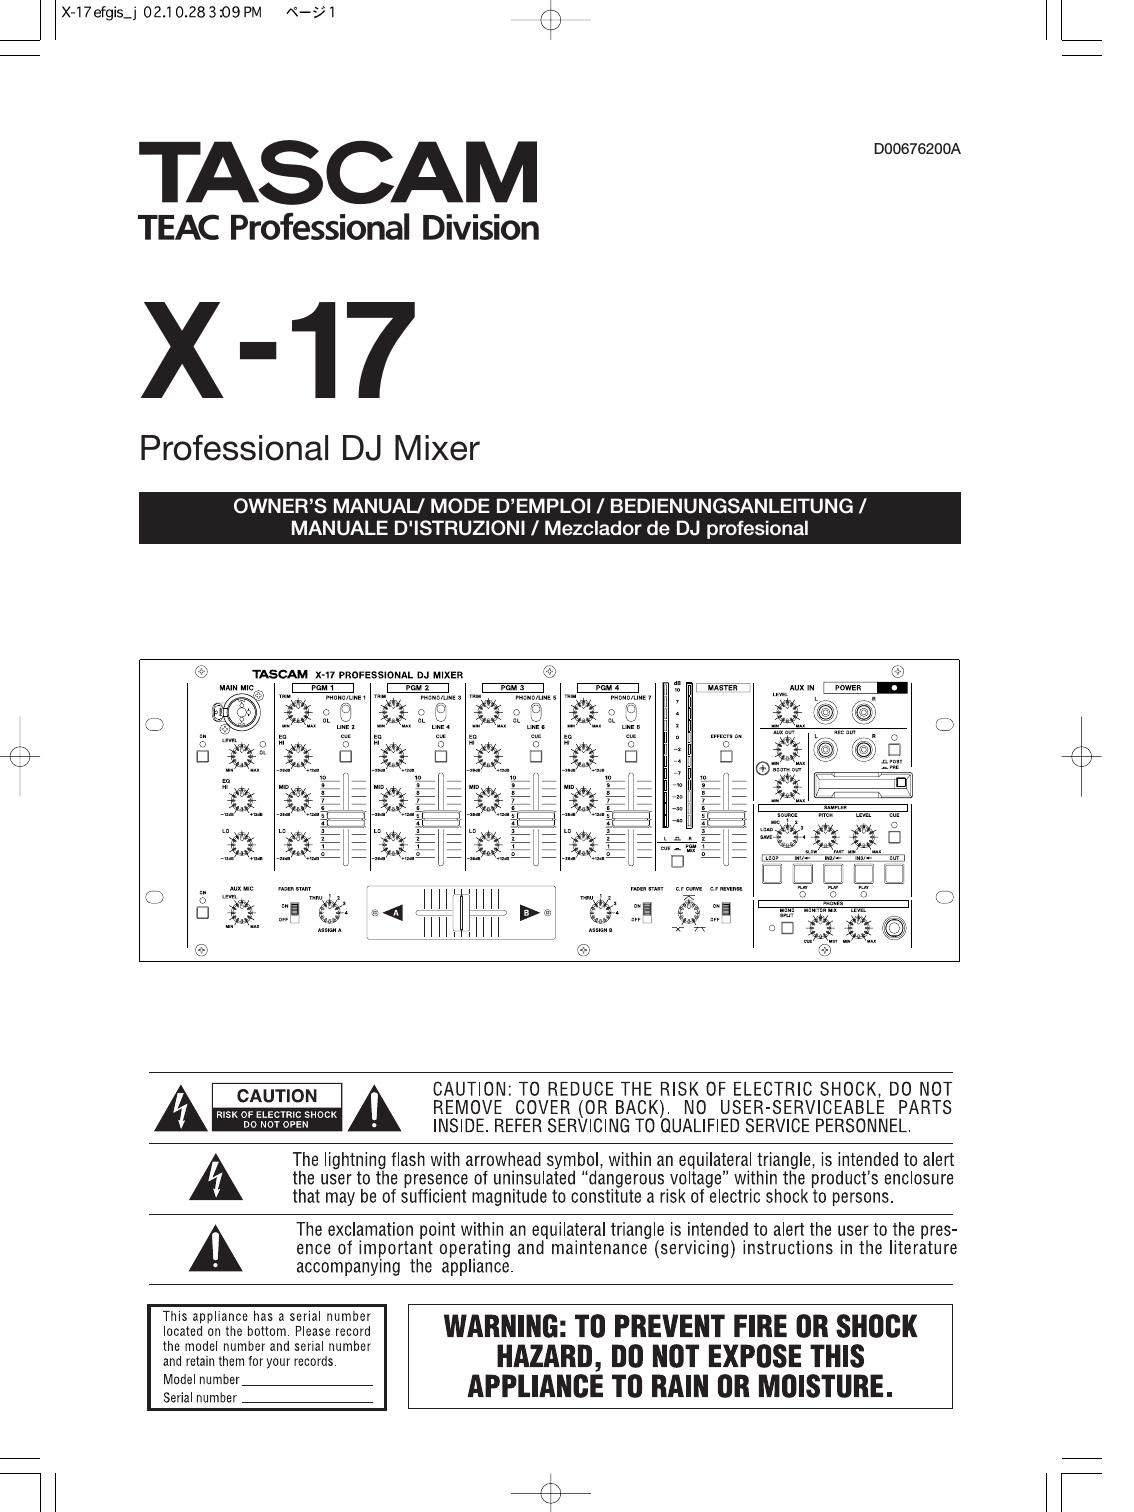 Tascam X 17 Owners Manual